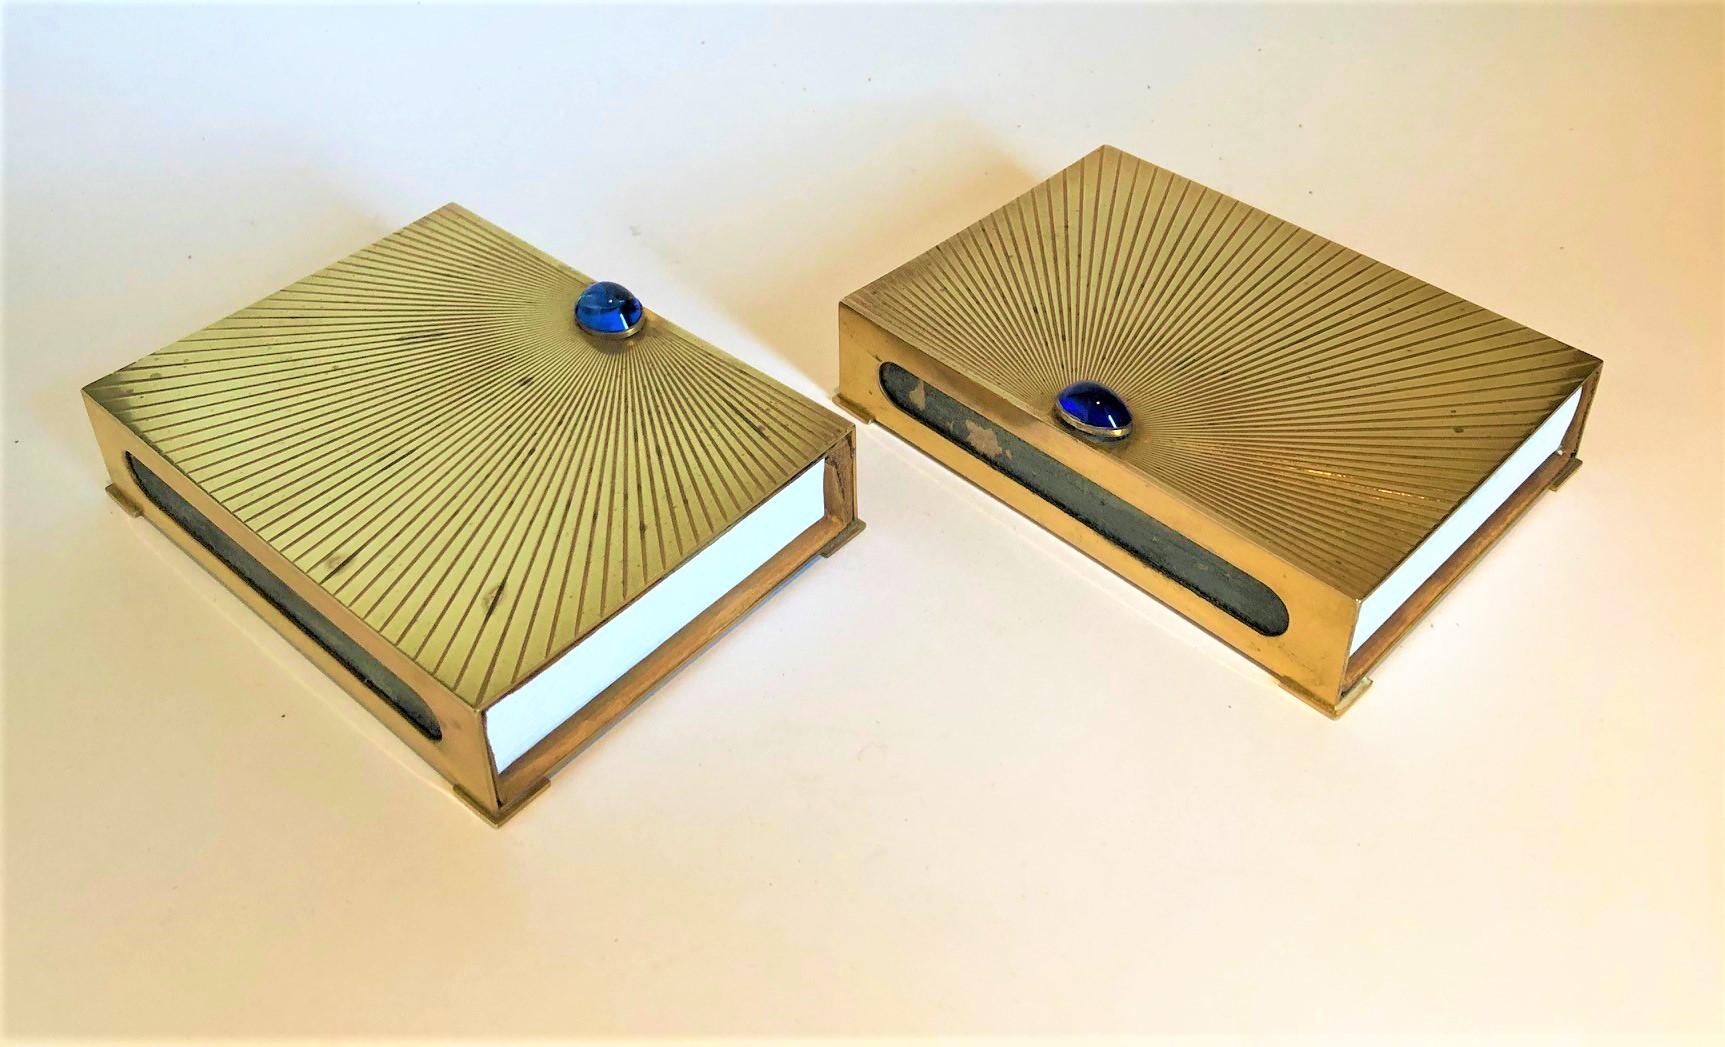 Christian Dior table Vesta gilt boxes for Matches. France 1950´s.
Lovely Pair of Christian dior gilt boxes. They have a blue stone on each one.
Perfect for any coffee table or any desk.
Both marked Christian Dior, Made in France.